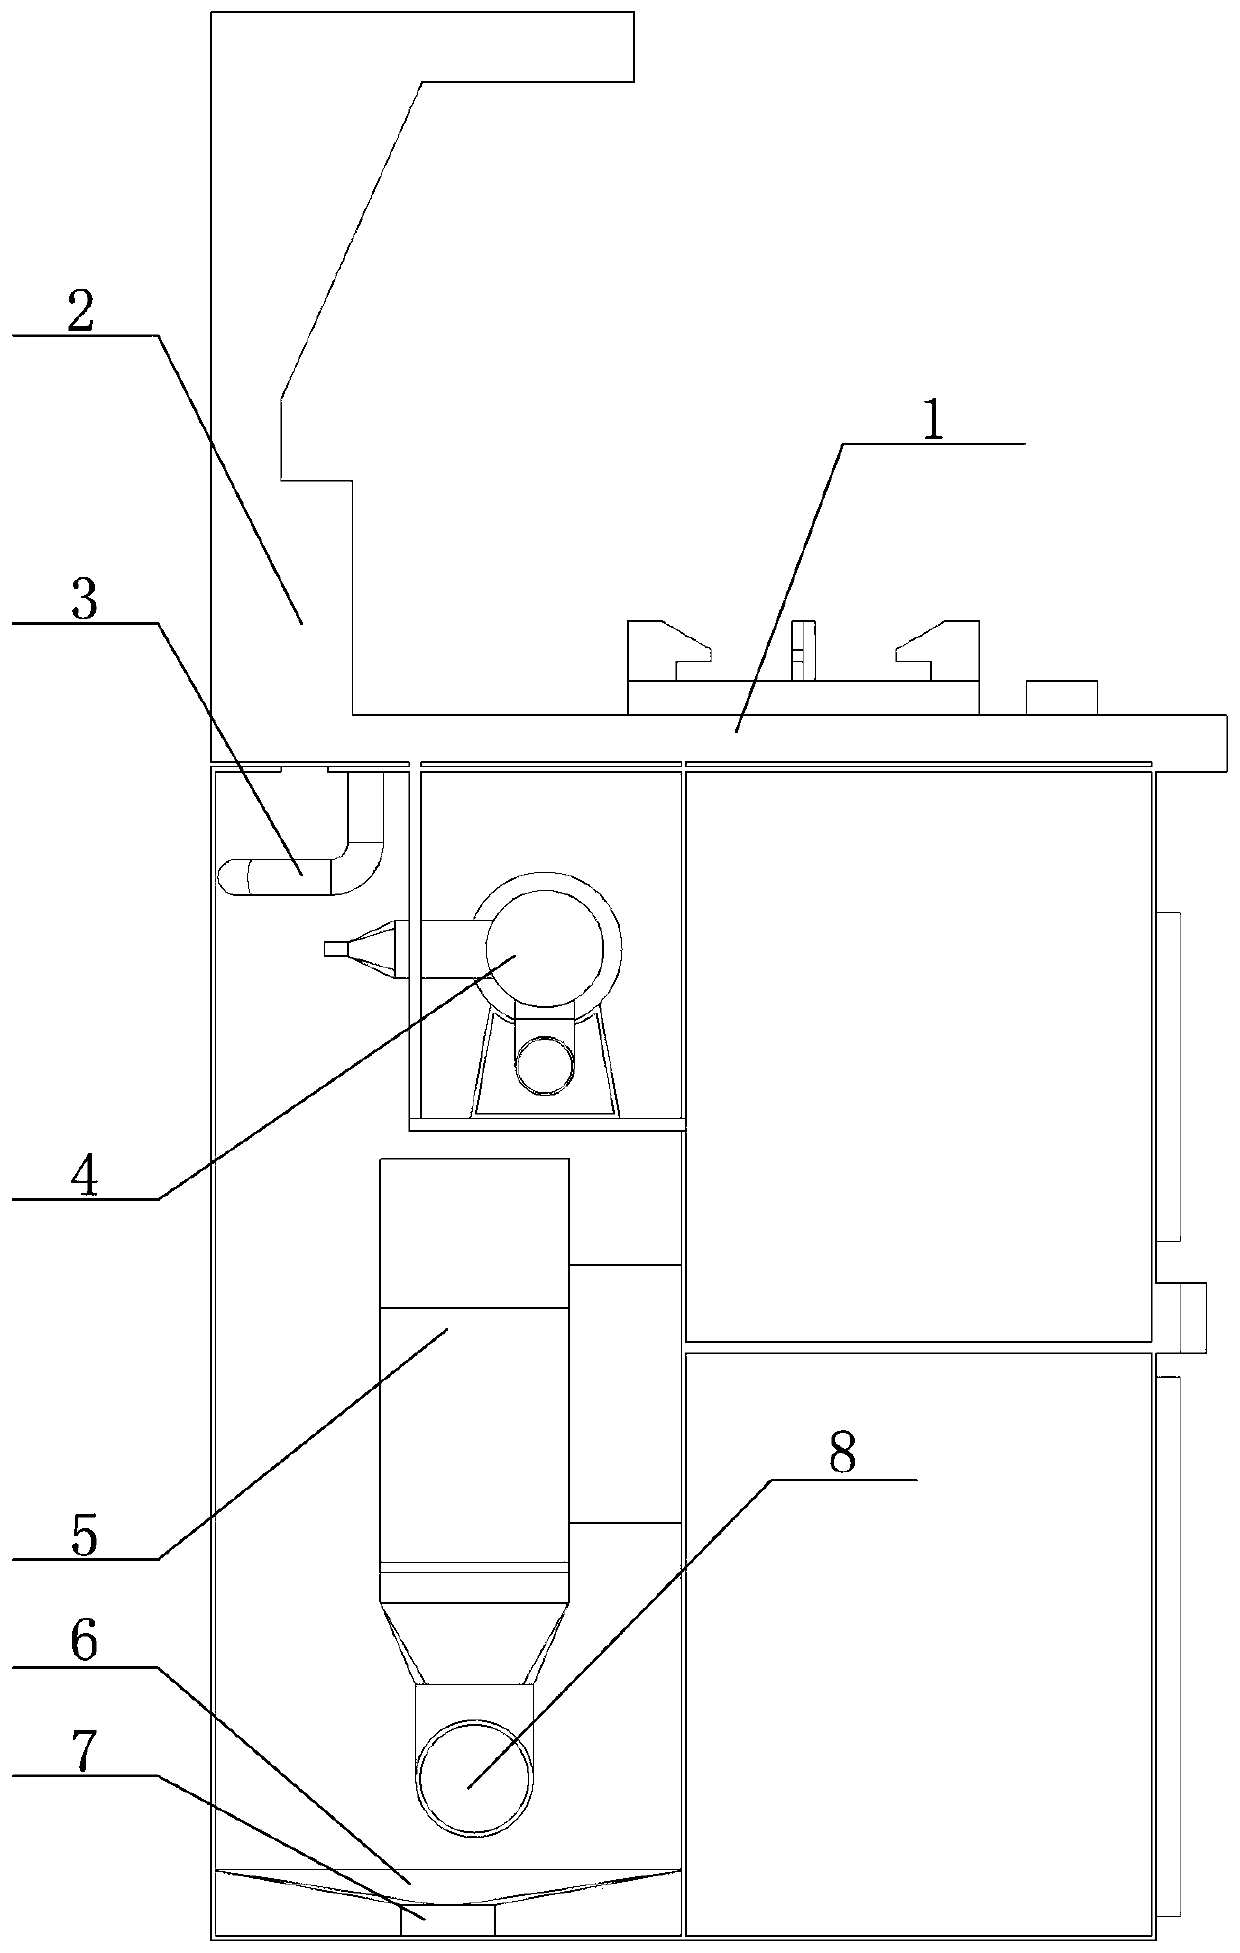 Novel integrated stove with vacuum device